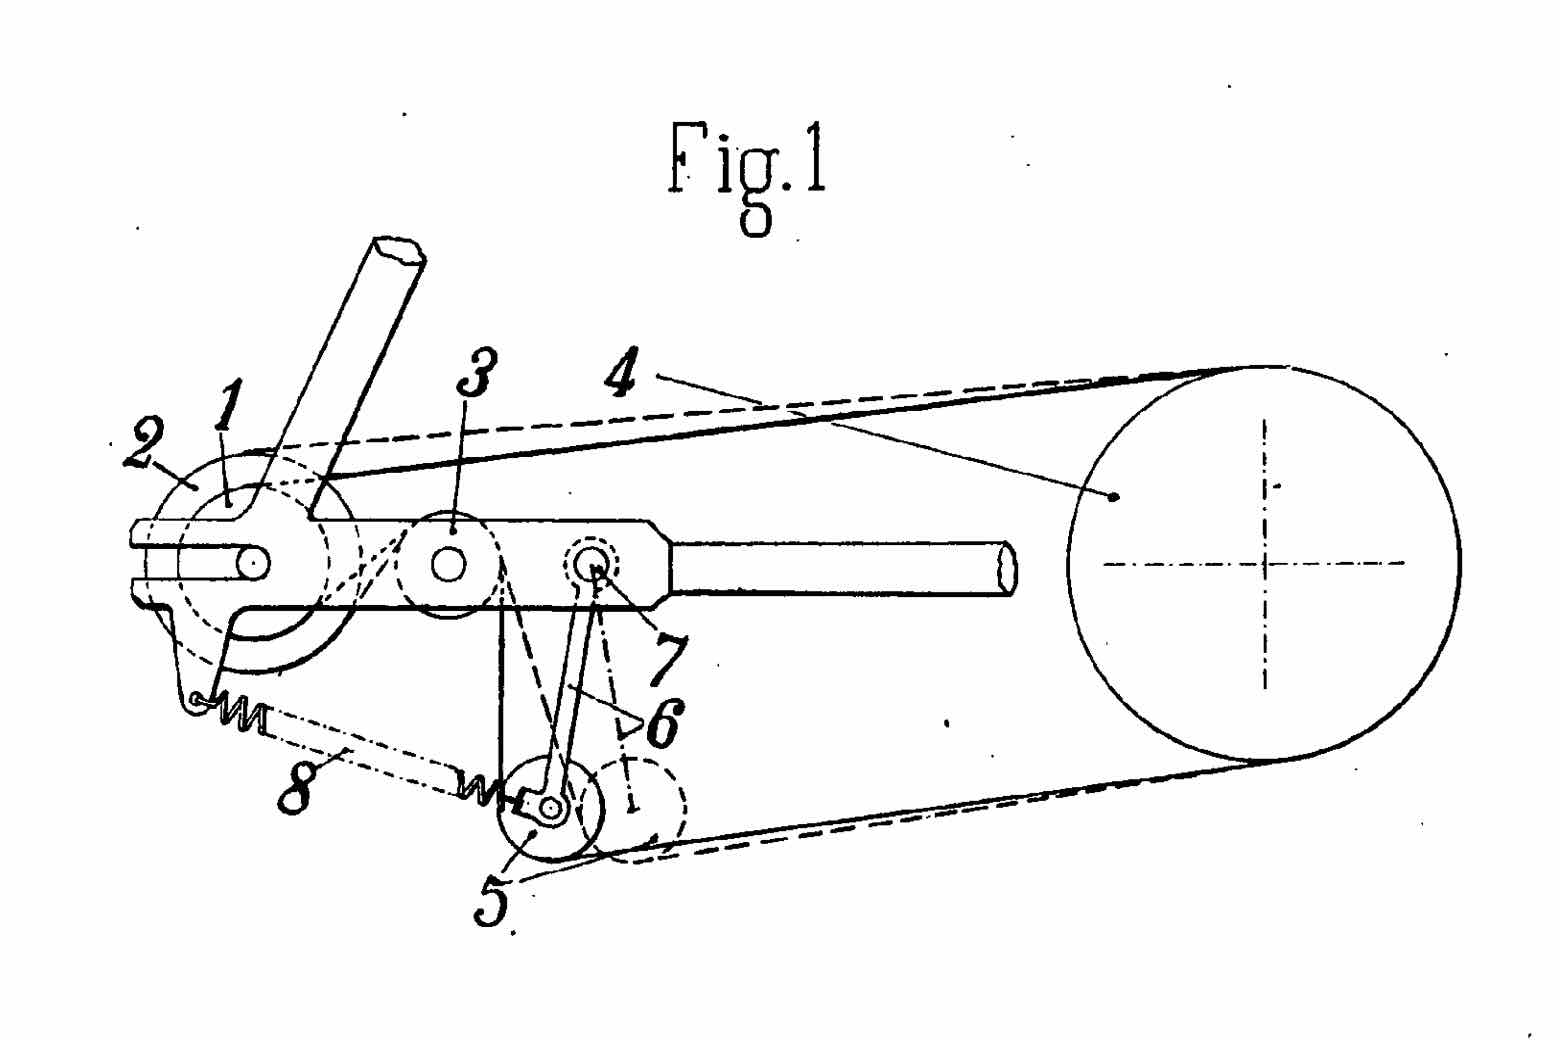 French Patent 406,967 - Boizot 2 speed main image